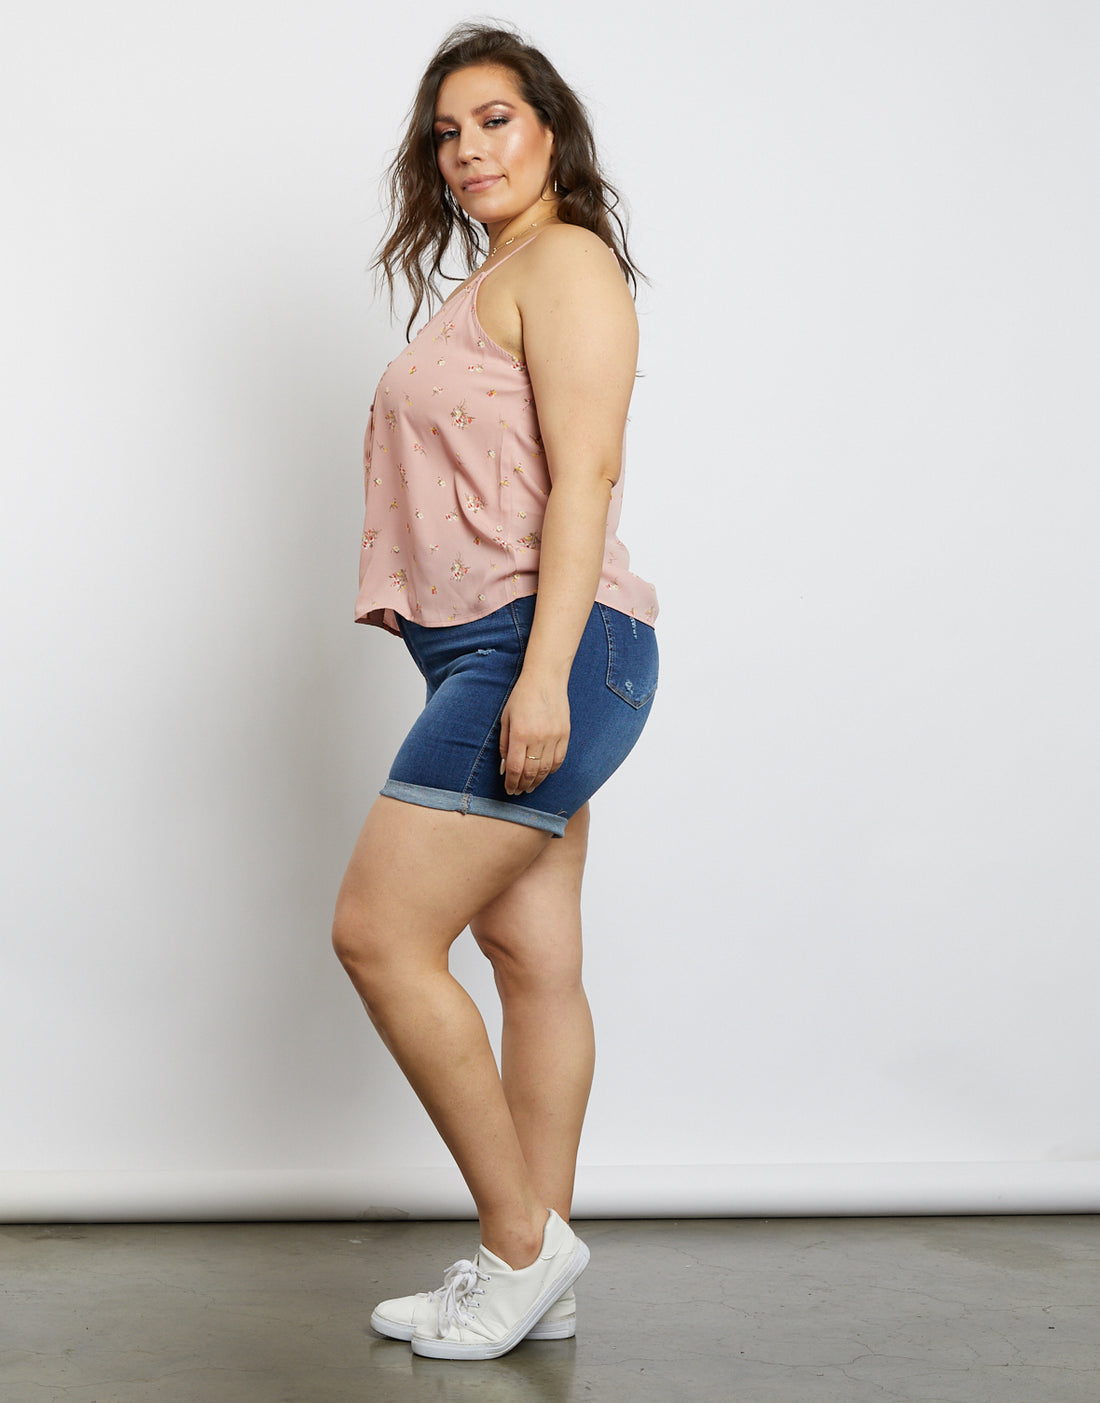 Curve All You Need Is Floral Tank Top Plus Size Tops -2020AVE